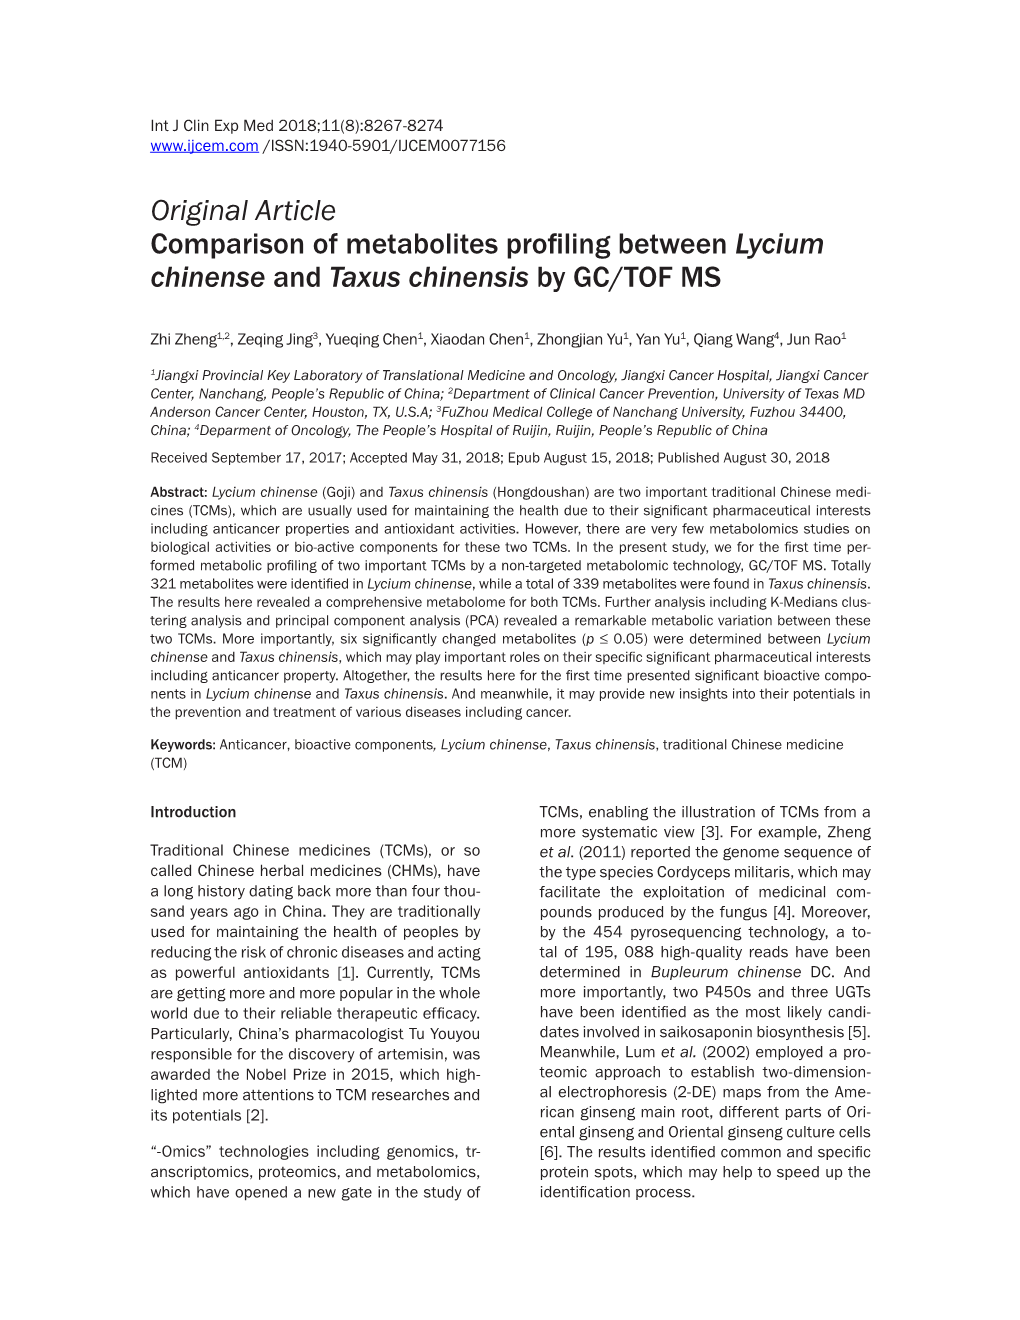 Comparison of Metabolites Profiling Between Lycium Chinense and Taxus Chinensis by GC/TOF MS